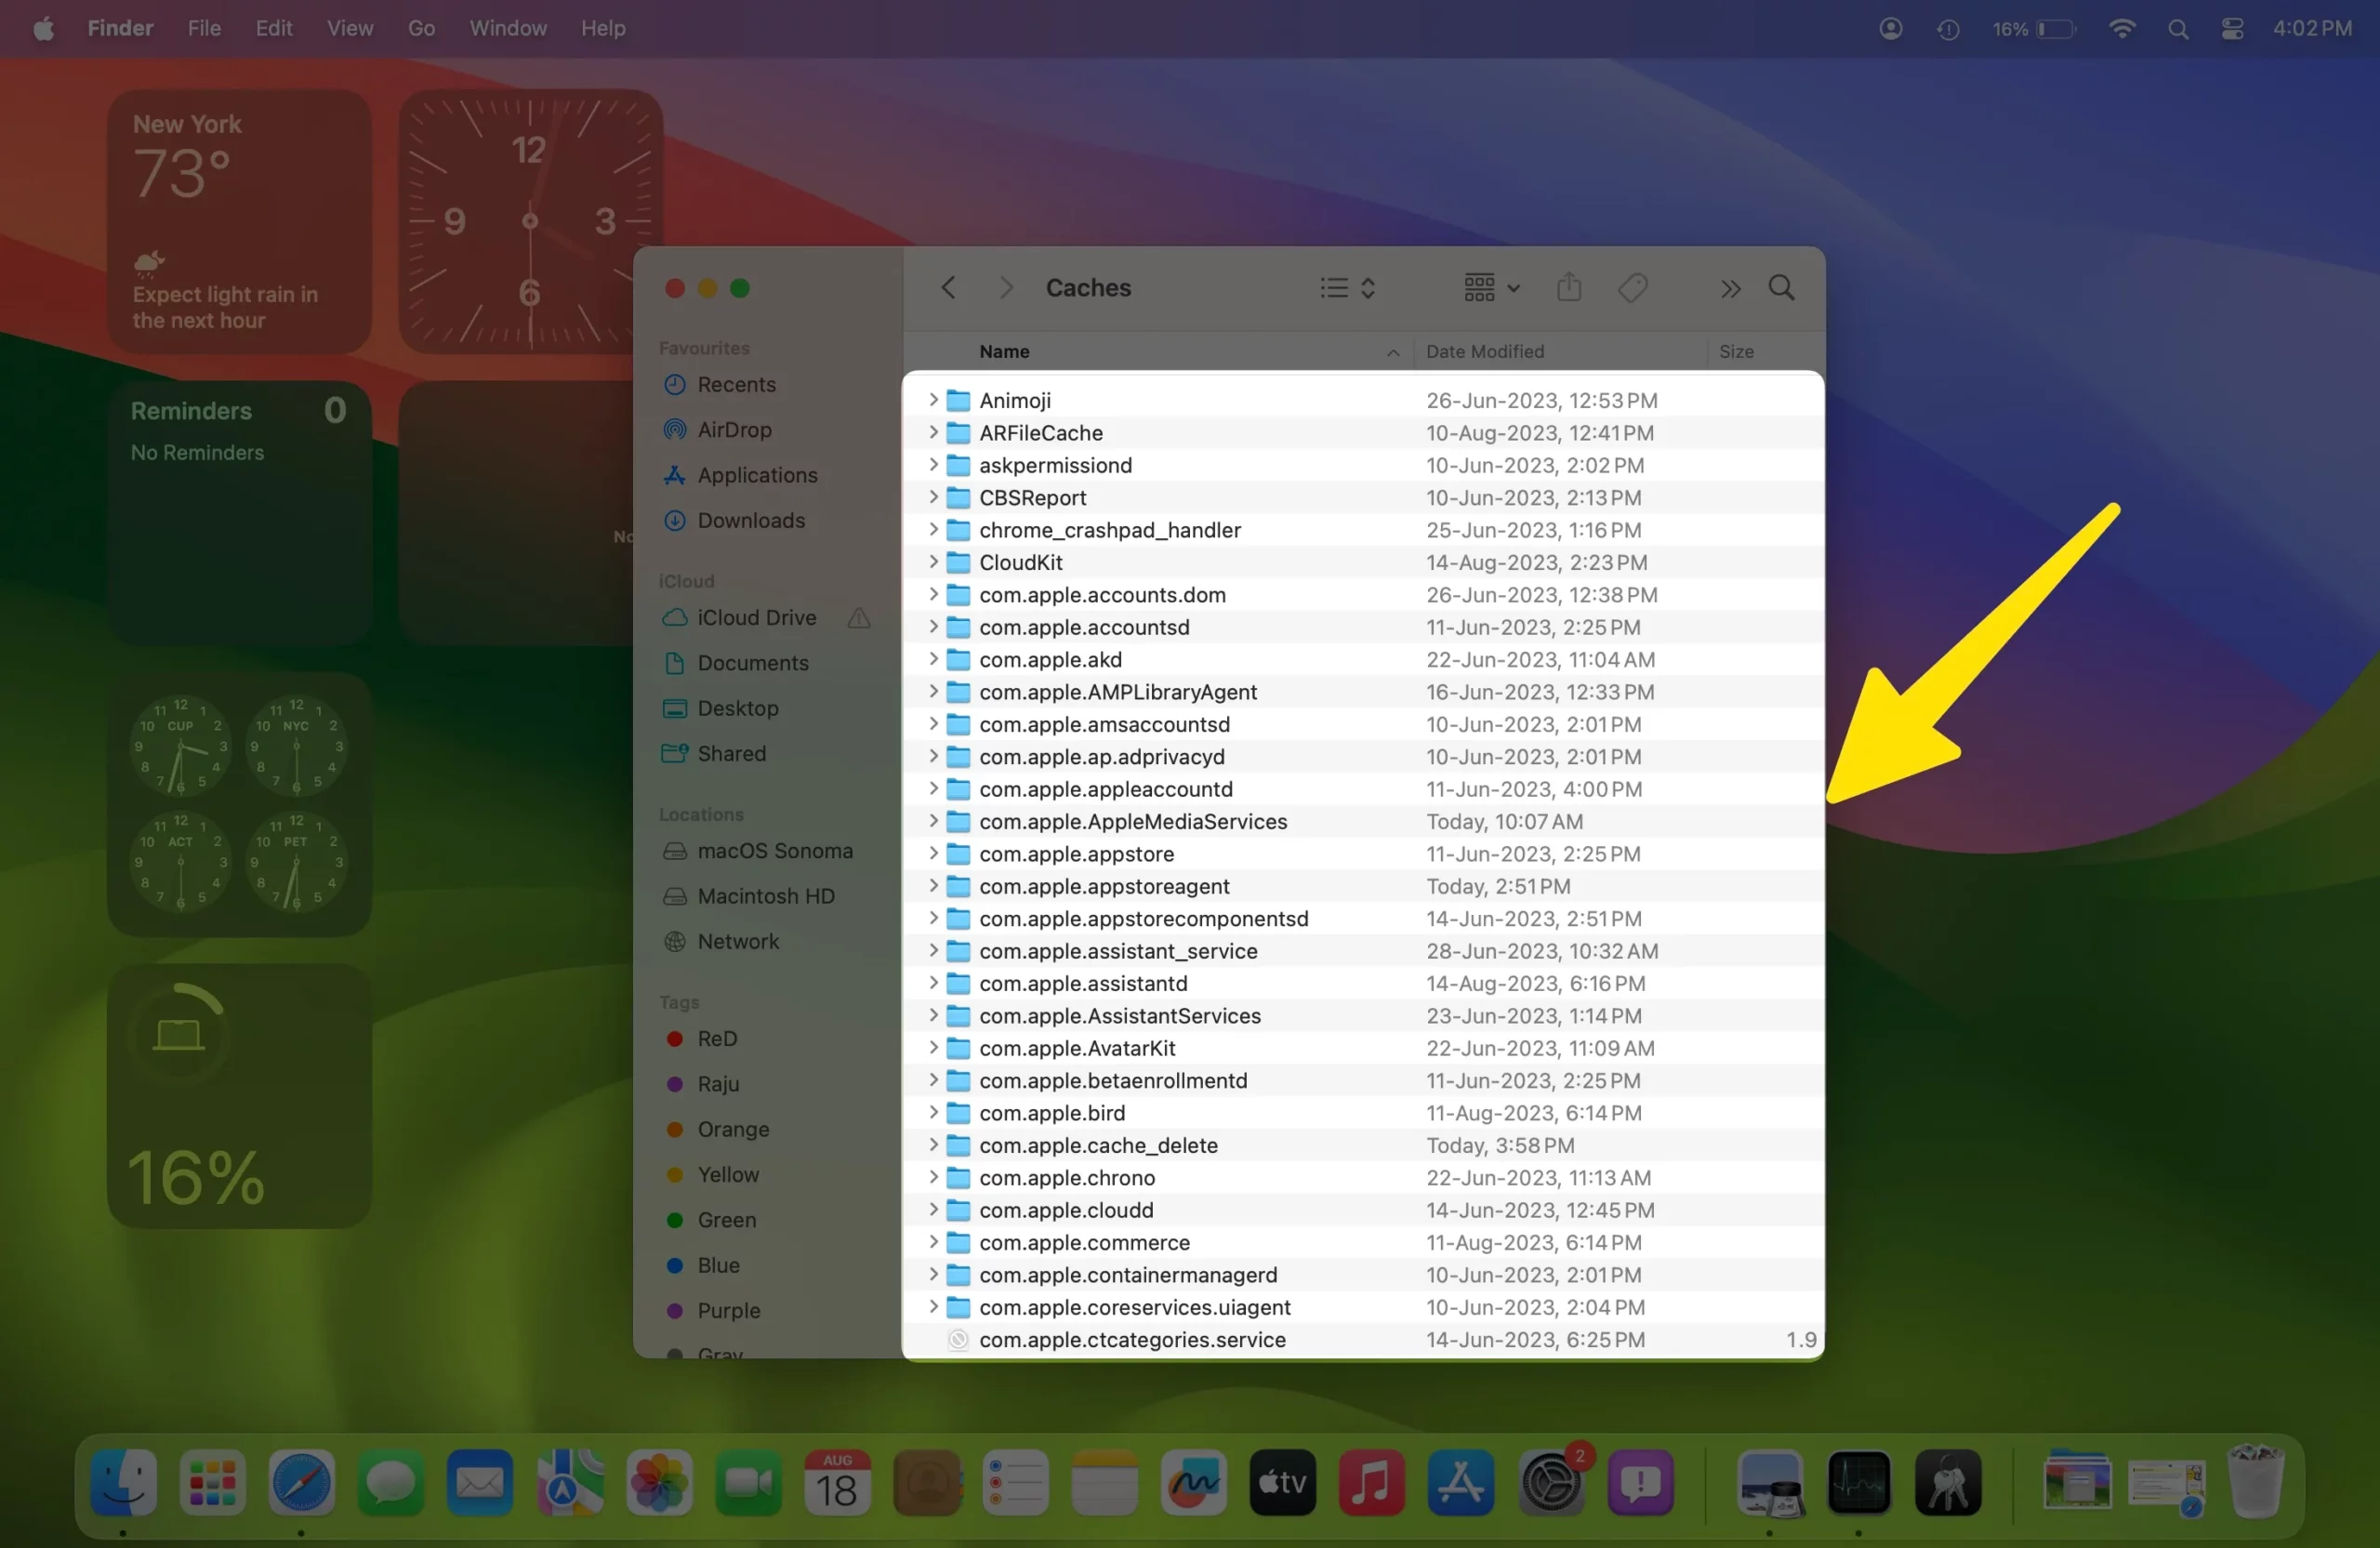 View all Caches folder on Mac